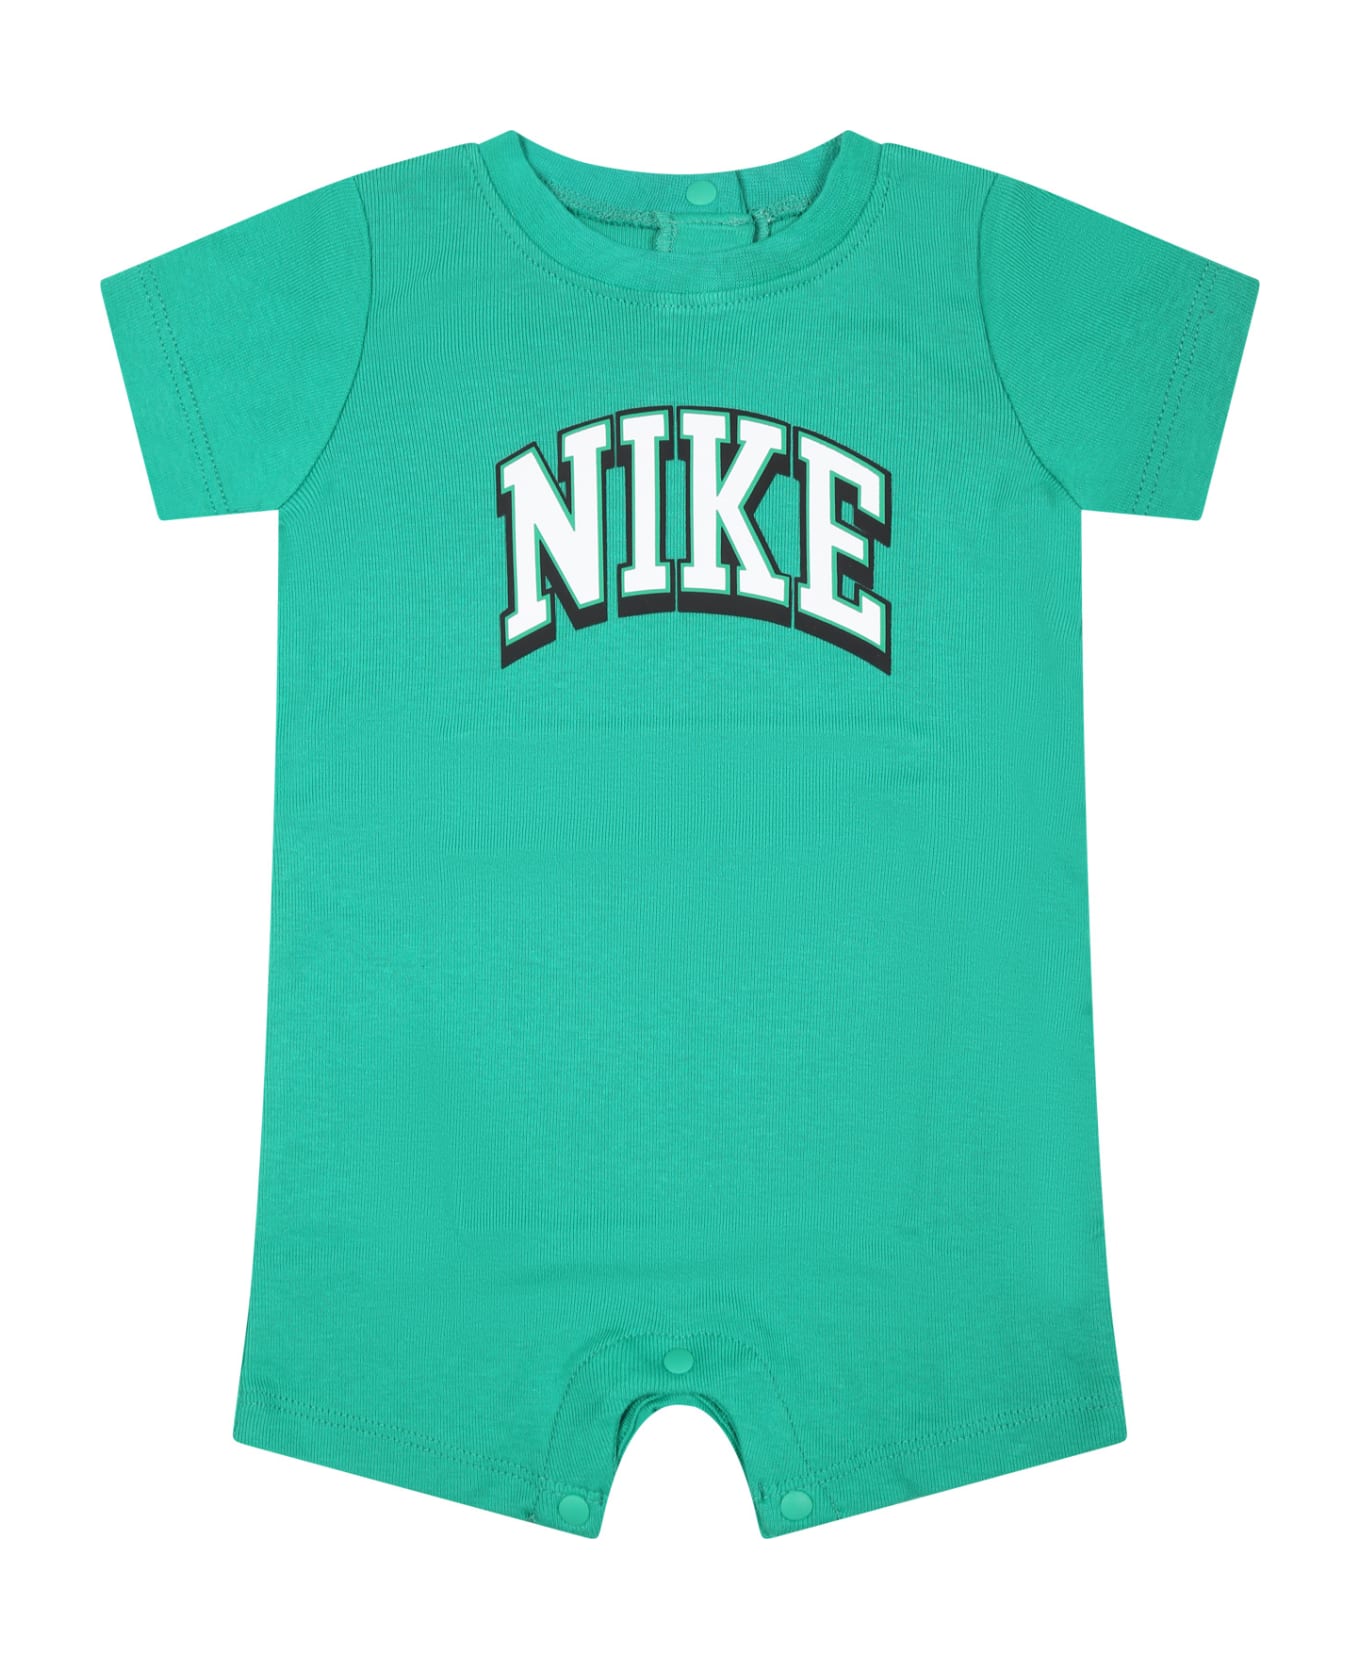 Nike Green Romper Set For Baby Boy With Logo - Green